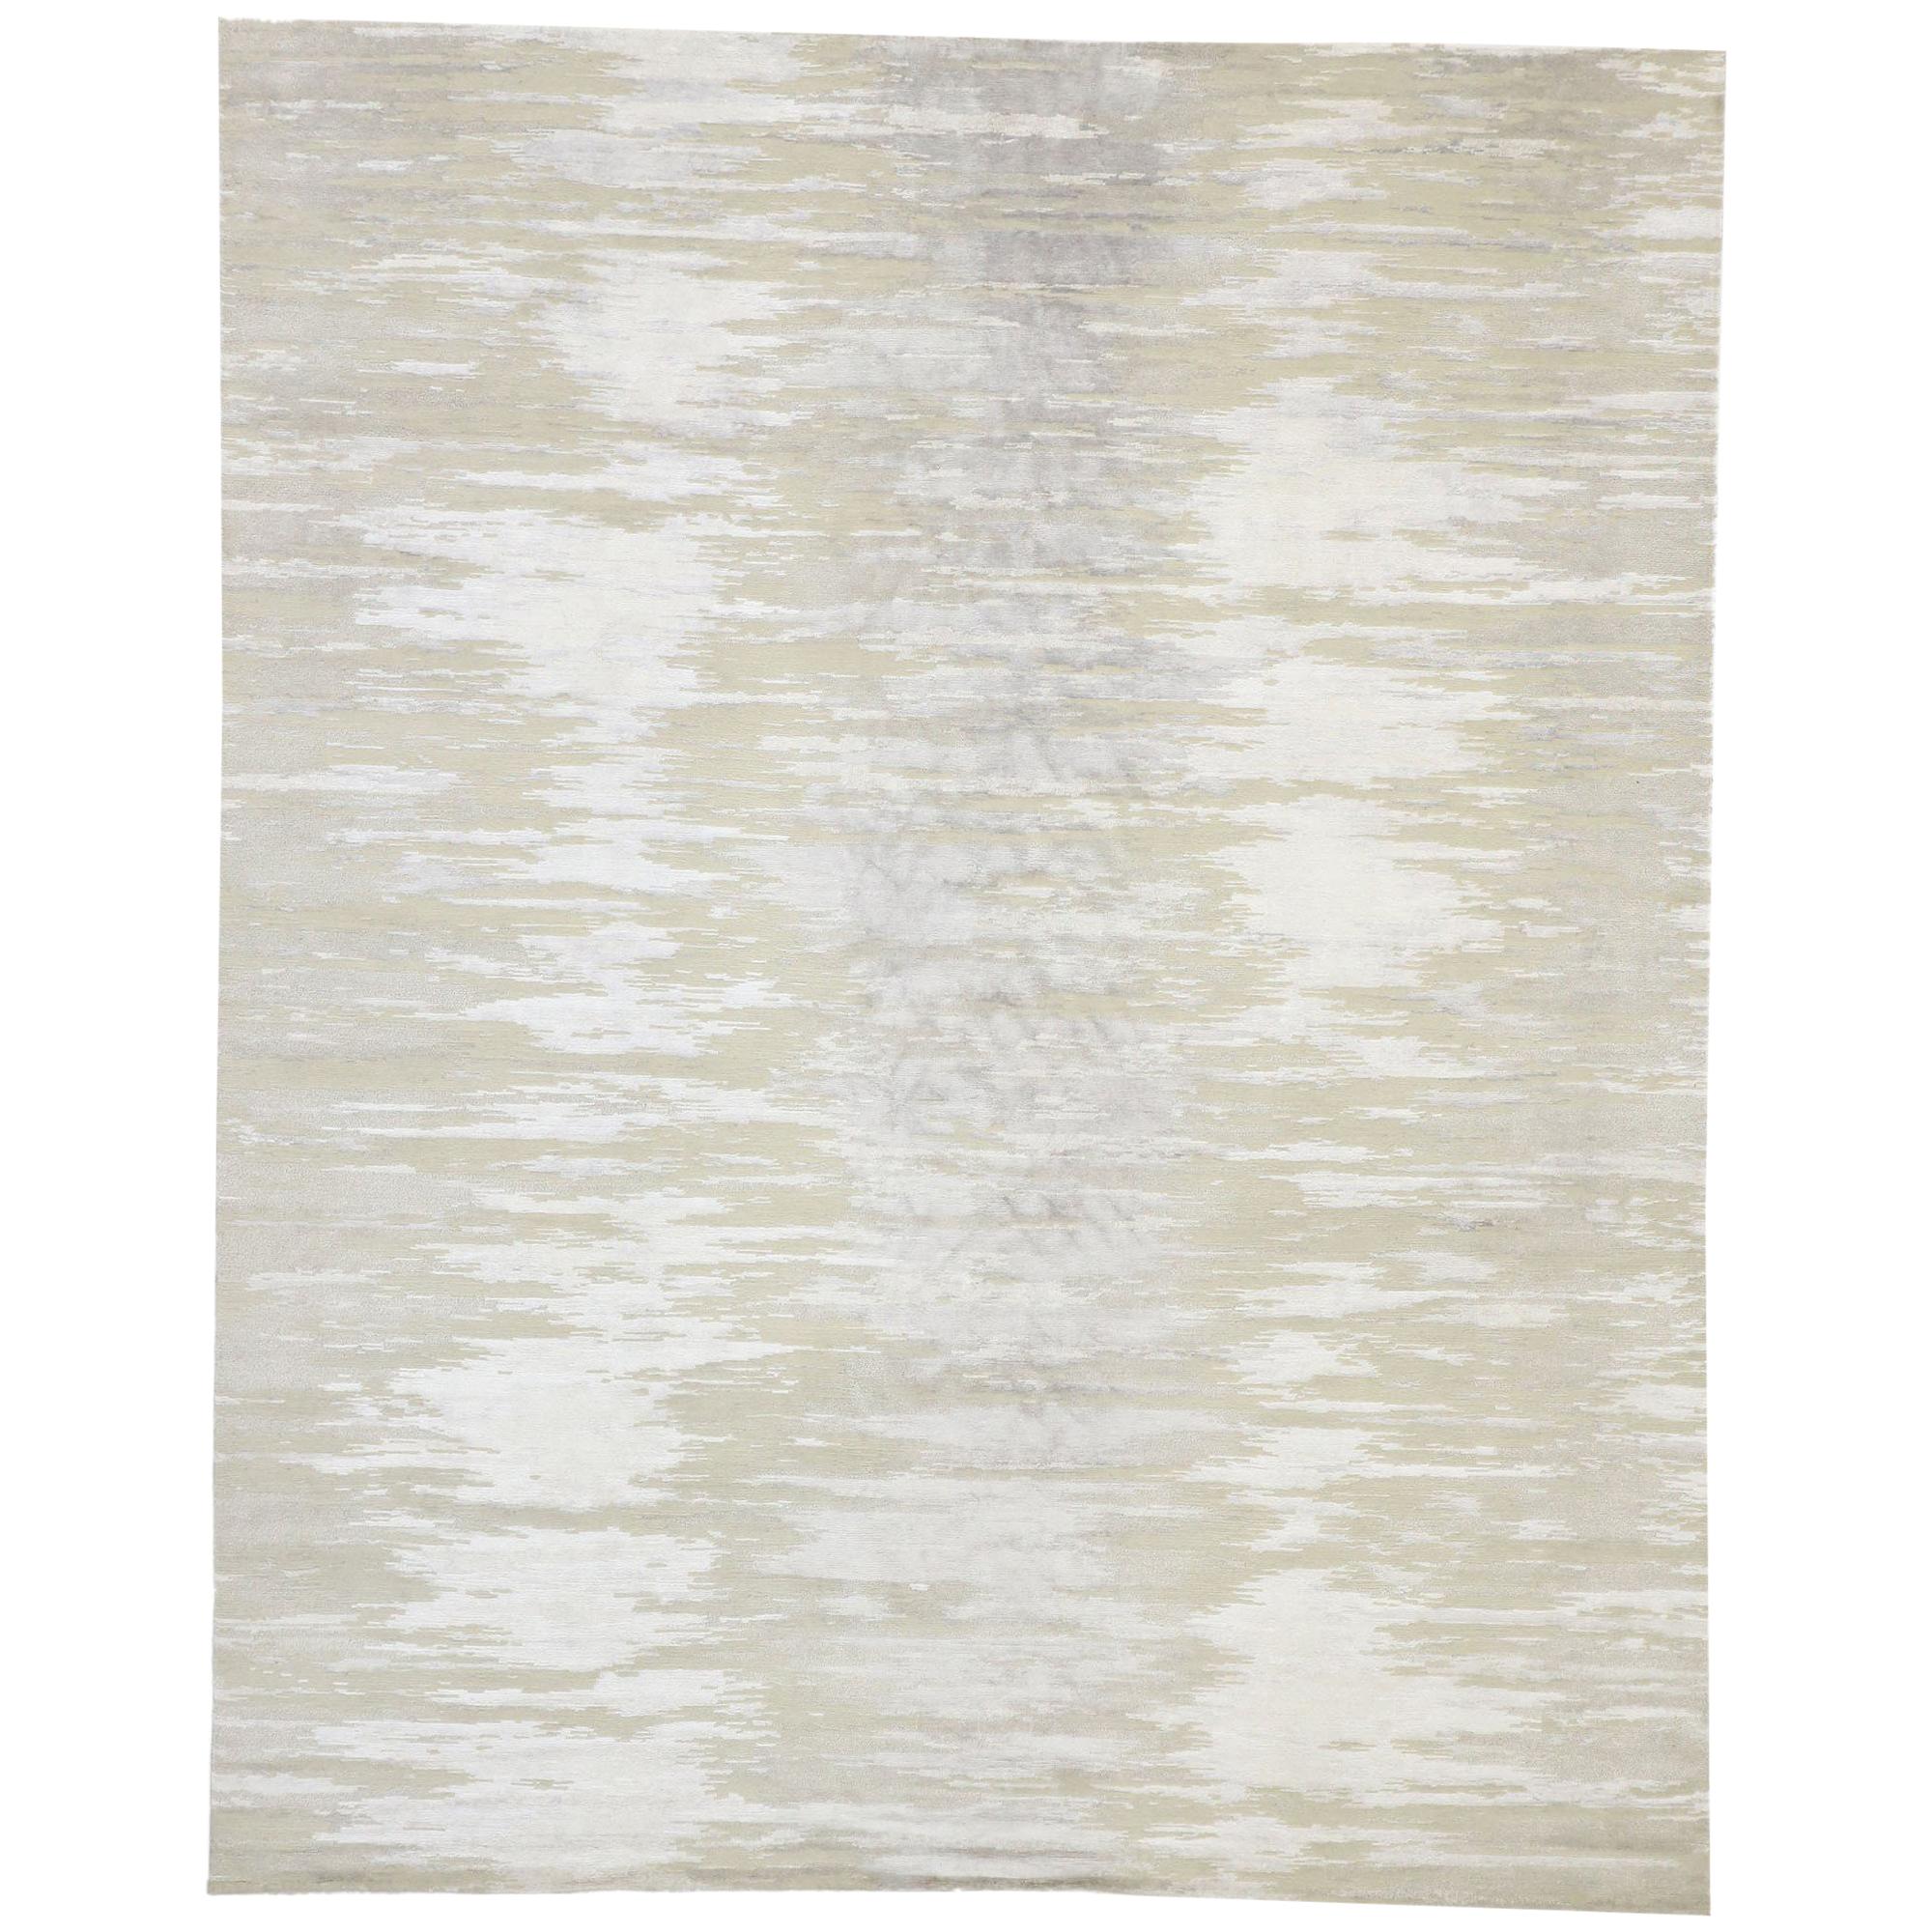 New Nordic Ombré Area Rug with Neutral Colors and Hygge Scandi Style